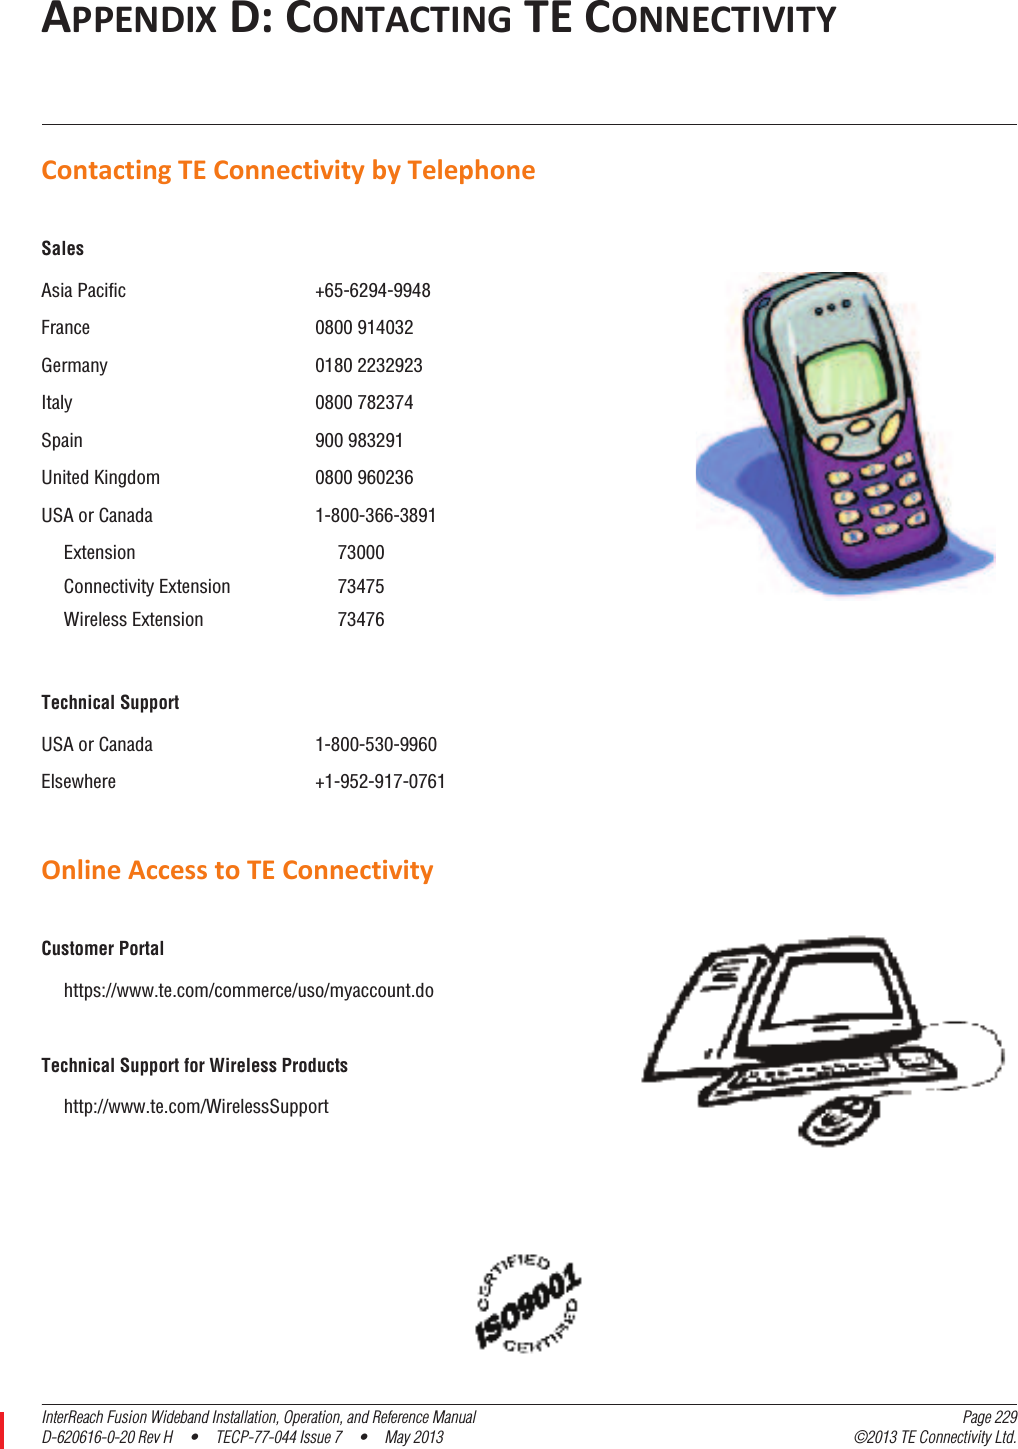 InterReach Fusion Wideband Installation, Operation, and Reference Manual Page 229D-620616-0-20 Rev H  •  TECP-77-044 Issue 7  •  May 2013 ©2013 TE Connectivity Ltd.APPENDIXD:CONTACTINGTECONNECTIVITYContactingTEConnectivitybyTelephoneOnlineAccesstoTEConnectivitySalesAsia Pacific +65-6294-9948France 0800 914032Germany 0180 2232923Italy 0800 782374Spain 900 983291United Kingdom 0800 960236USA or Canada 1-800-366-3891Extension 73000Connectivity Extension 73475Wireless Extension 73476Technical SupportUSA or Canada 1-800-530-9960Elsewhere +1-952-917-0761Customer Portalhttps://www.te.com/commerce/uso/myaccount.doTechnical Support for Wireless Productshttp://www.te.com/WirelessSupport 